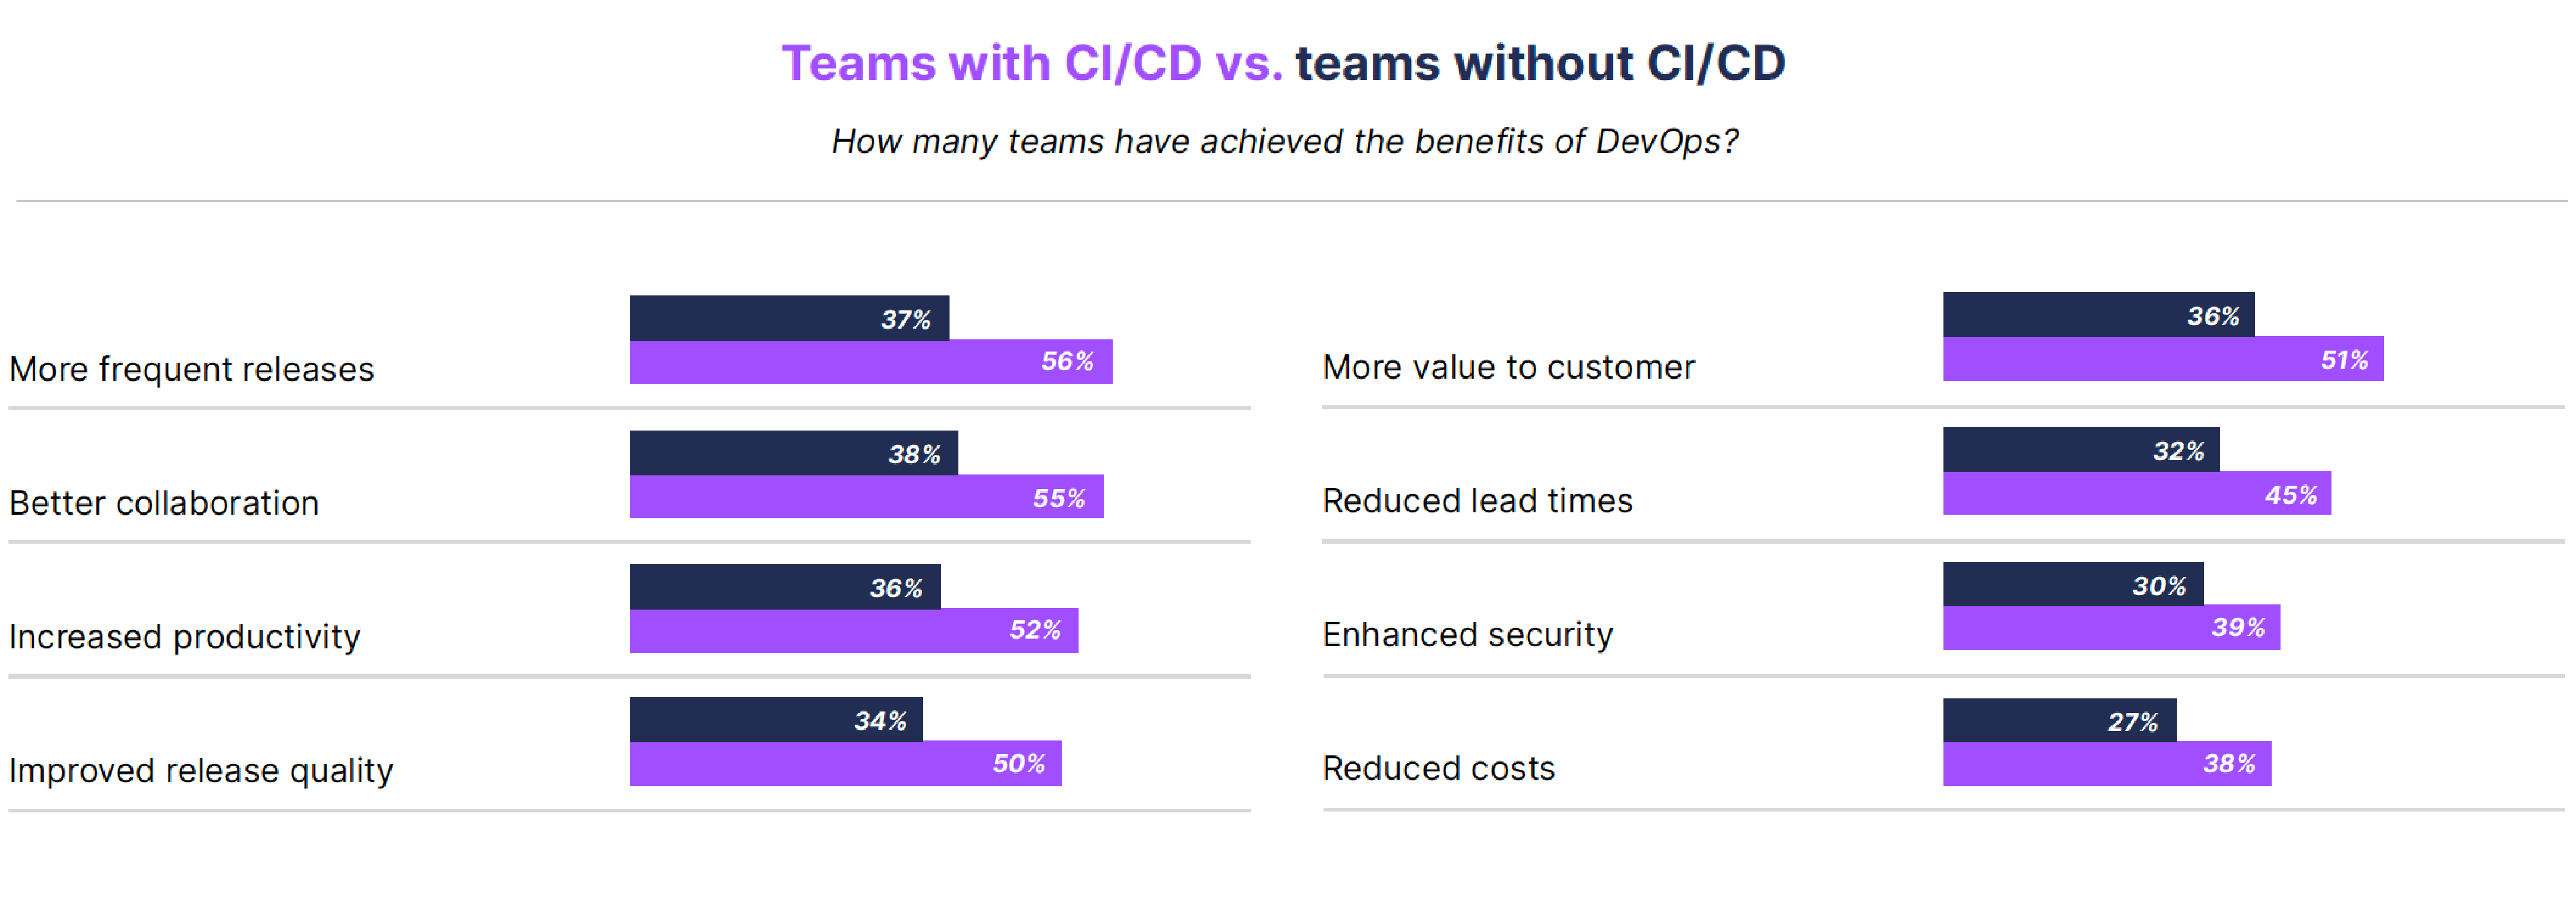 Salesforce teams practicing CI/CD outperform all others